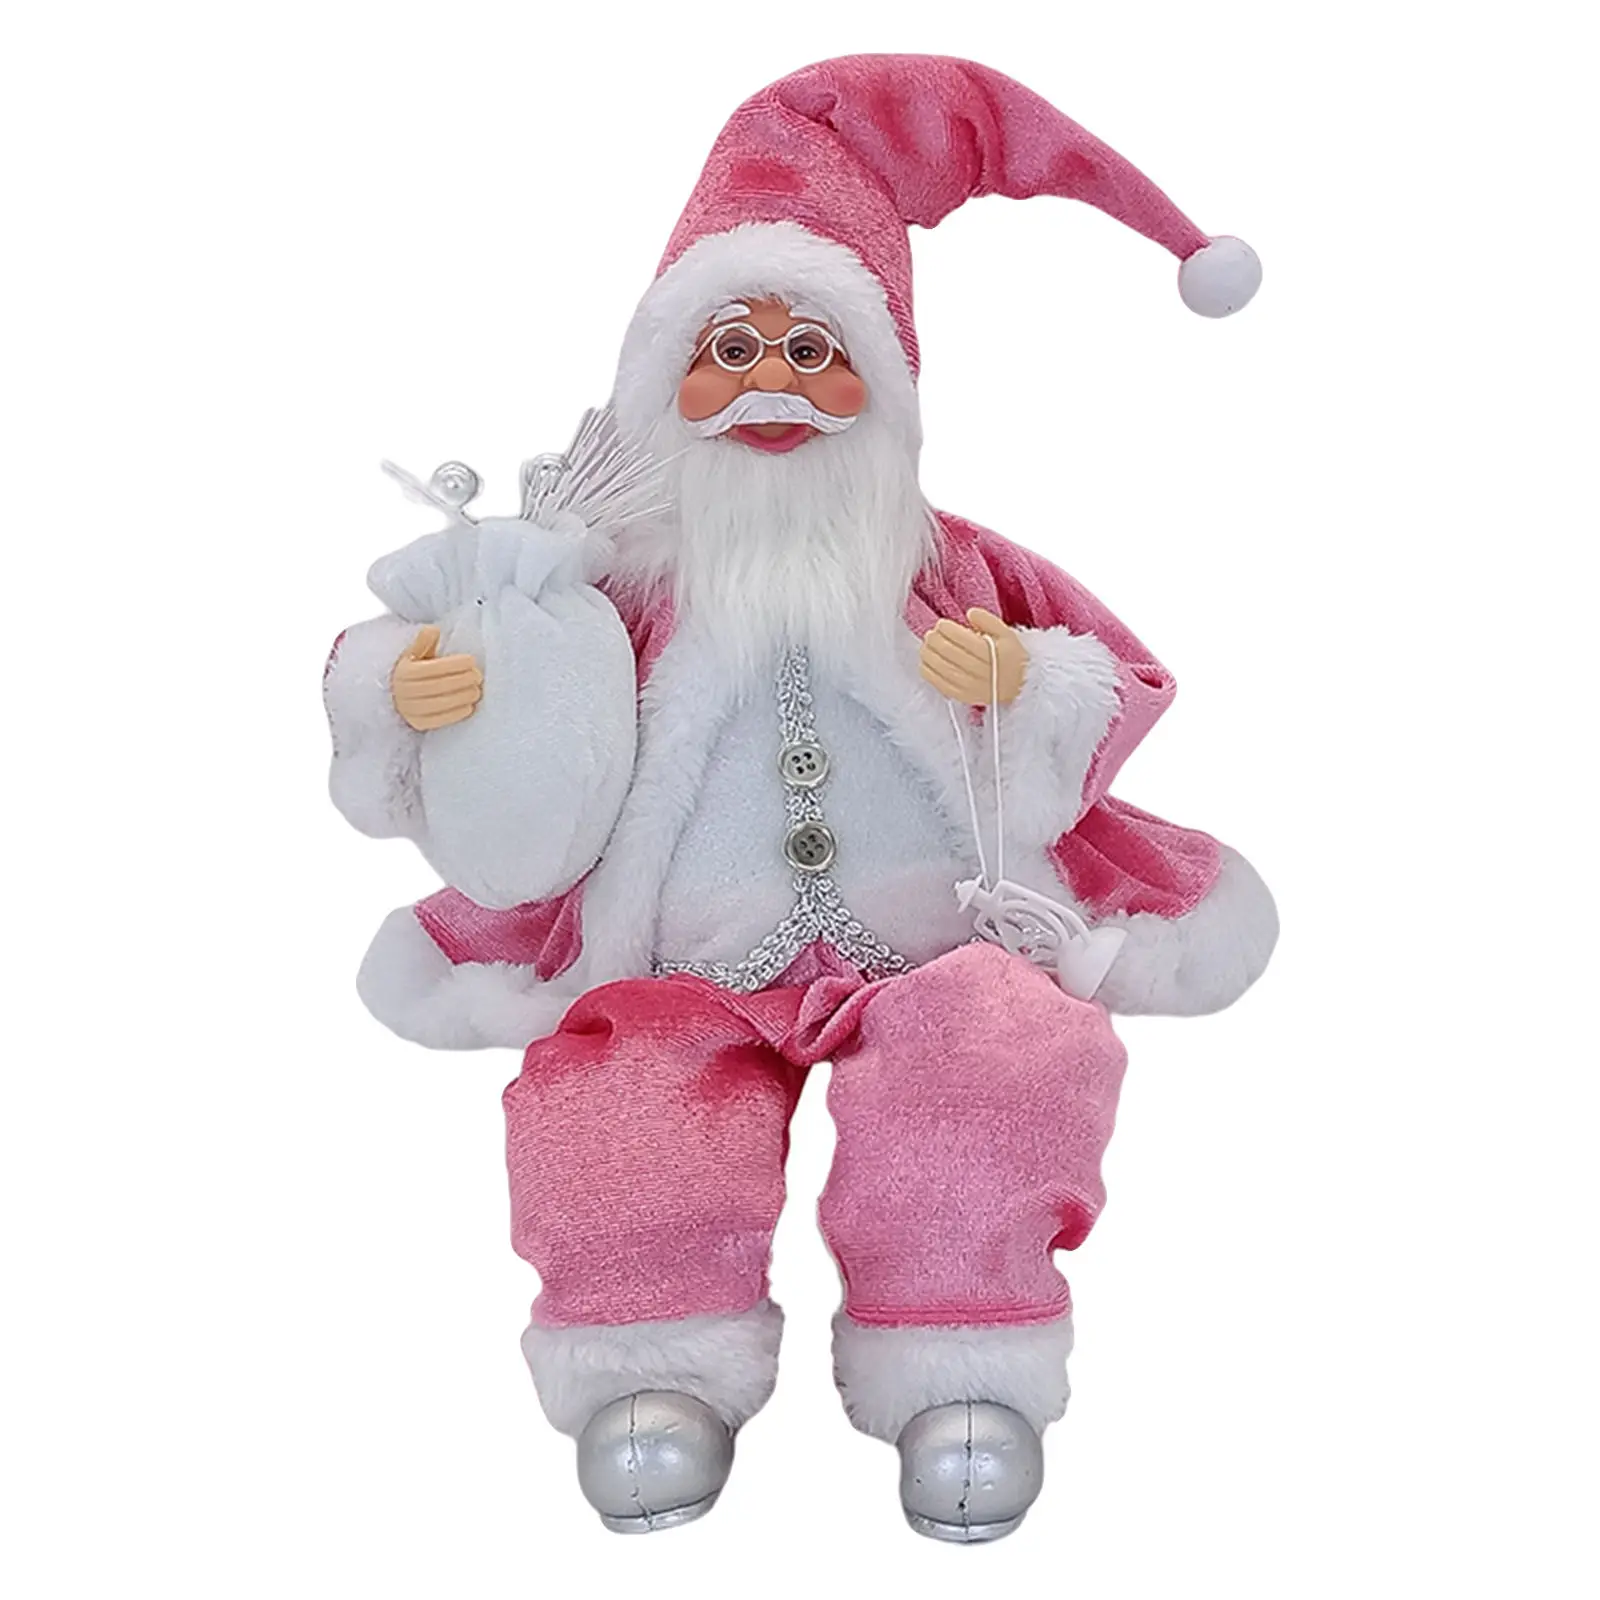 Santa Claus Doll Snowman New Year Dwarf Traditional Sitting Moving Cute Decorations Figurines for Office Party Xmas Tree Kids